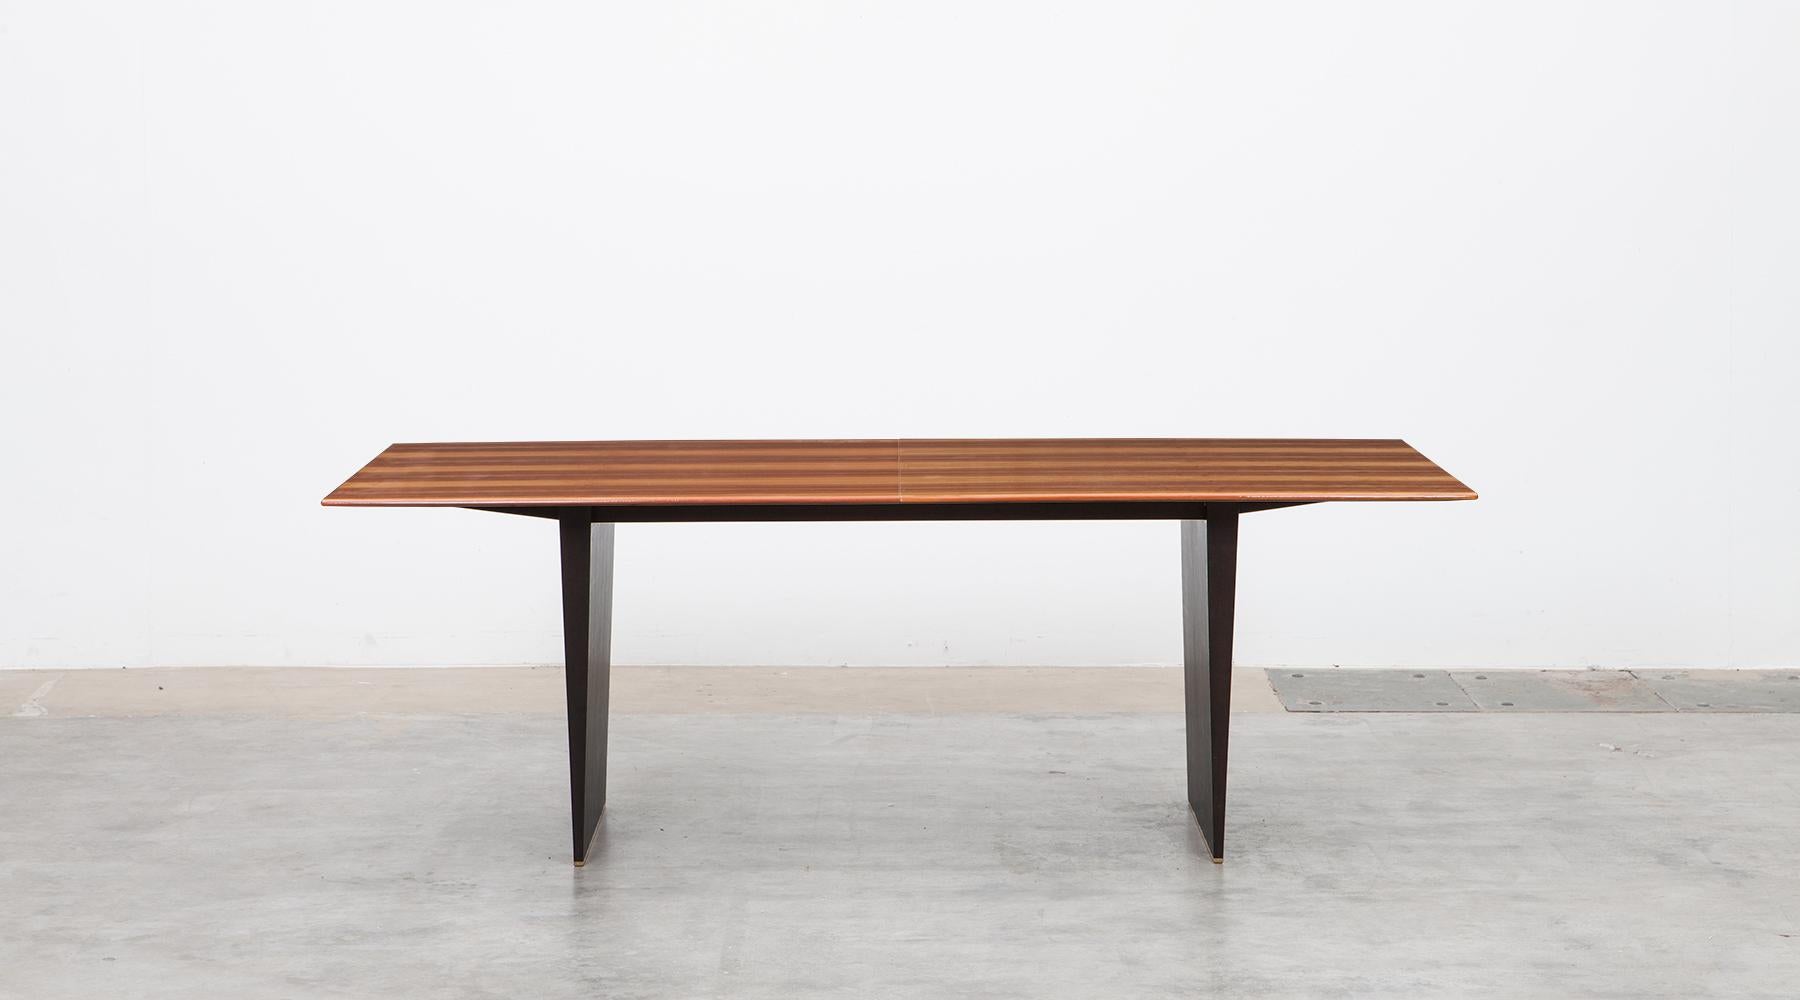 Tawi wooden dining table by Edward Wormley for Dunbar, USA, 1962.

This stunning dining table is designed by American Edward Wormley and comes with a wooden Tawi top which is composed in three leaves, so the table is extendable from 213 to 303 cm.